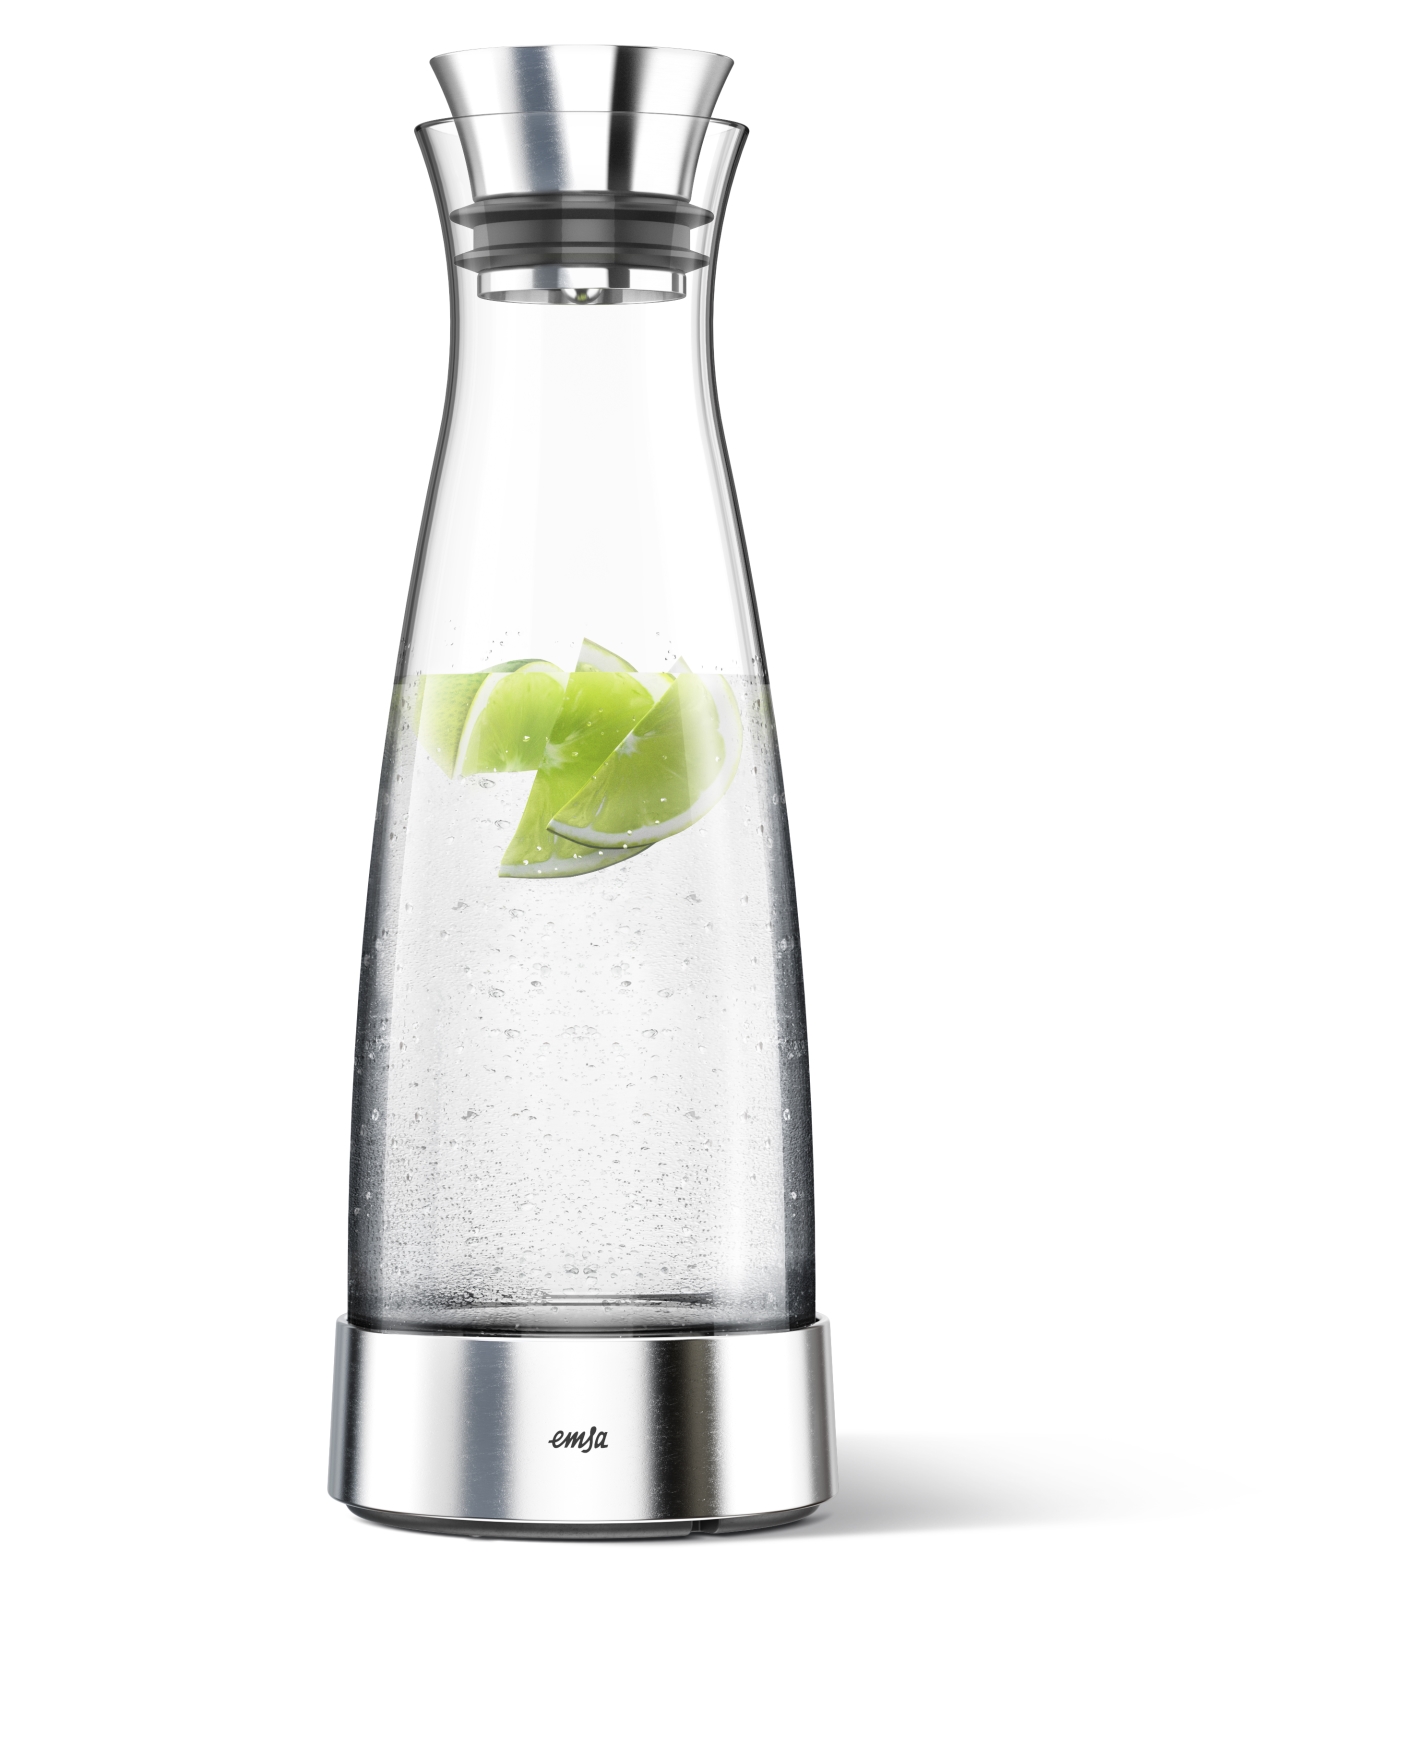 Cool drinks served with style – Flow Bottle and Flow Classic cooling ...